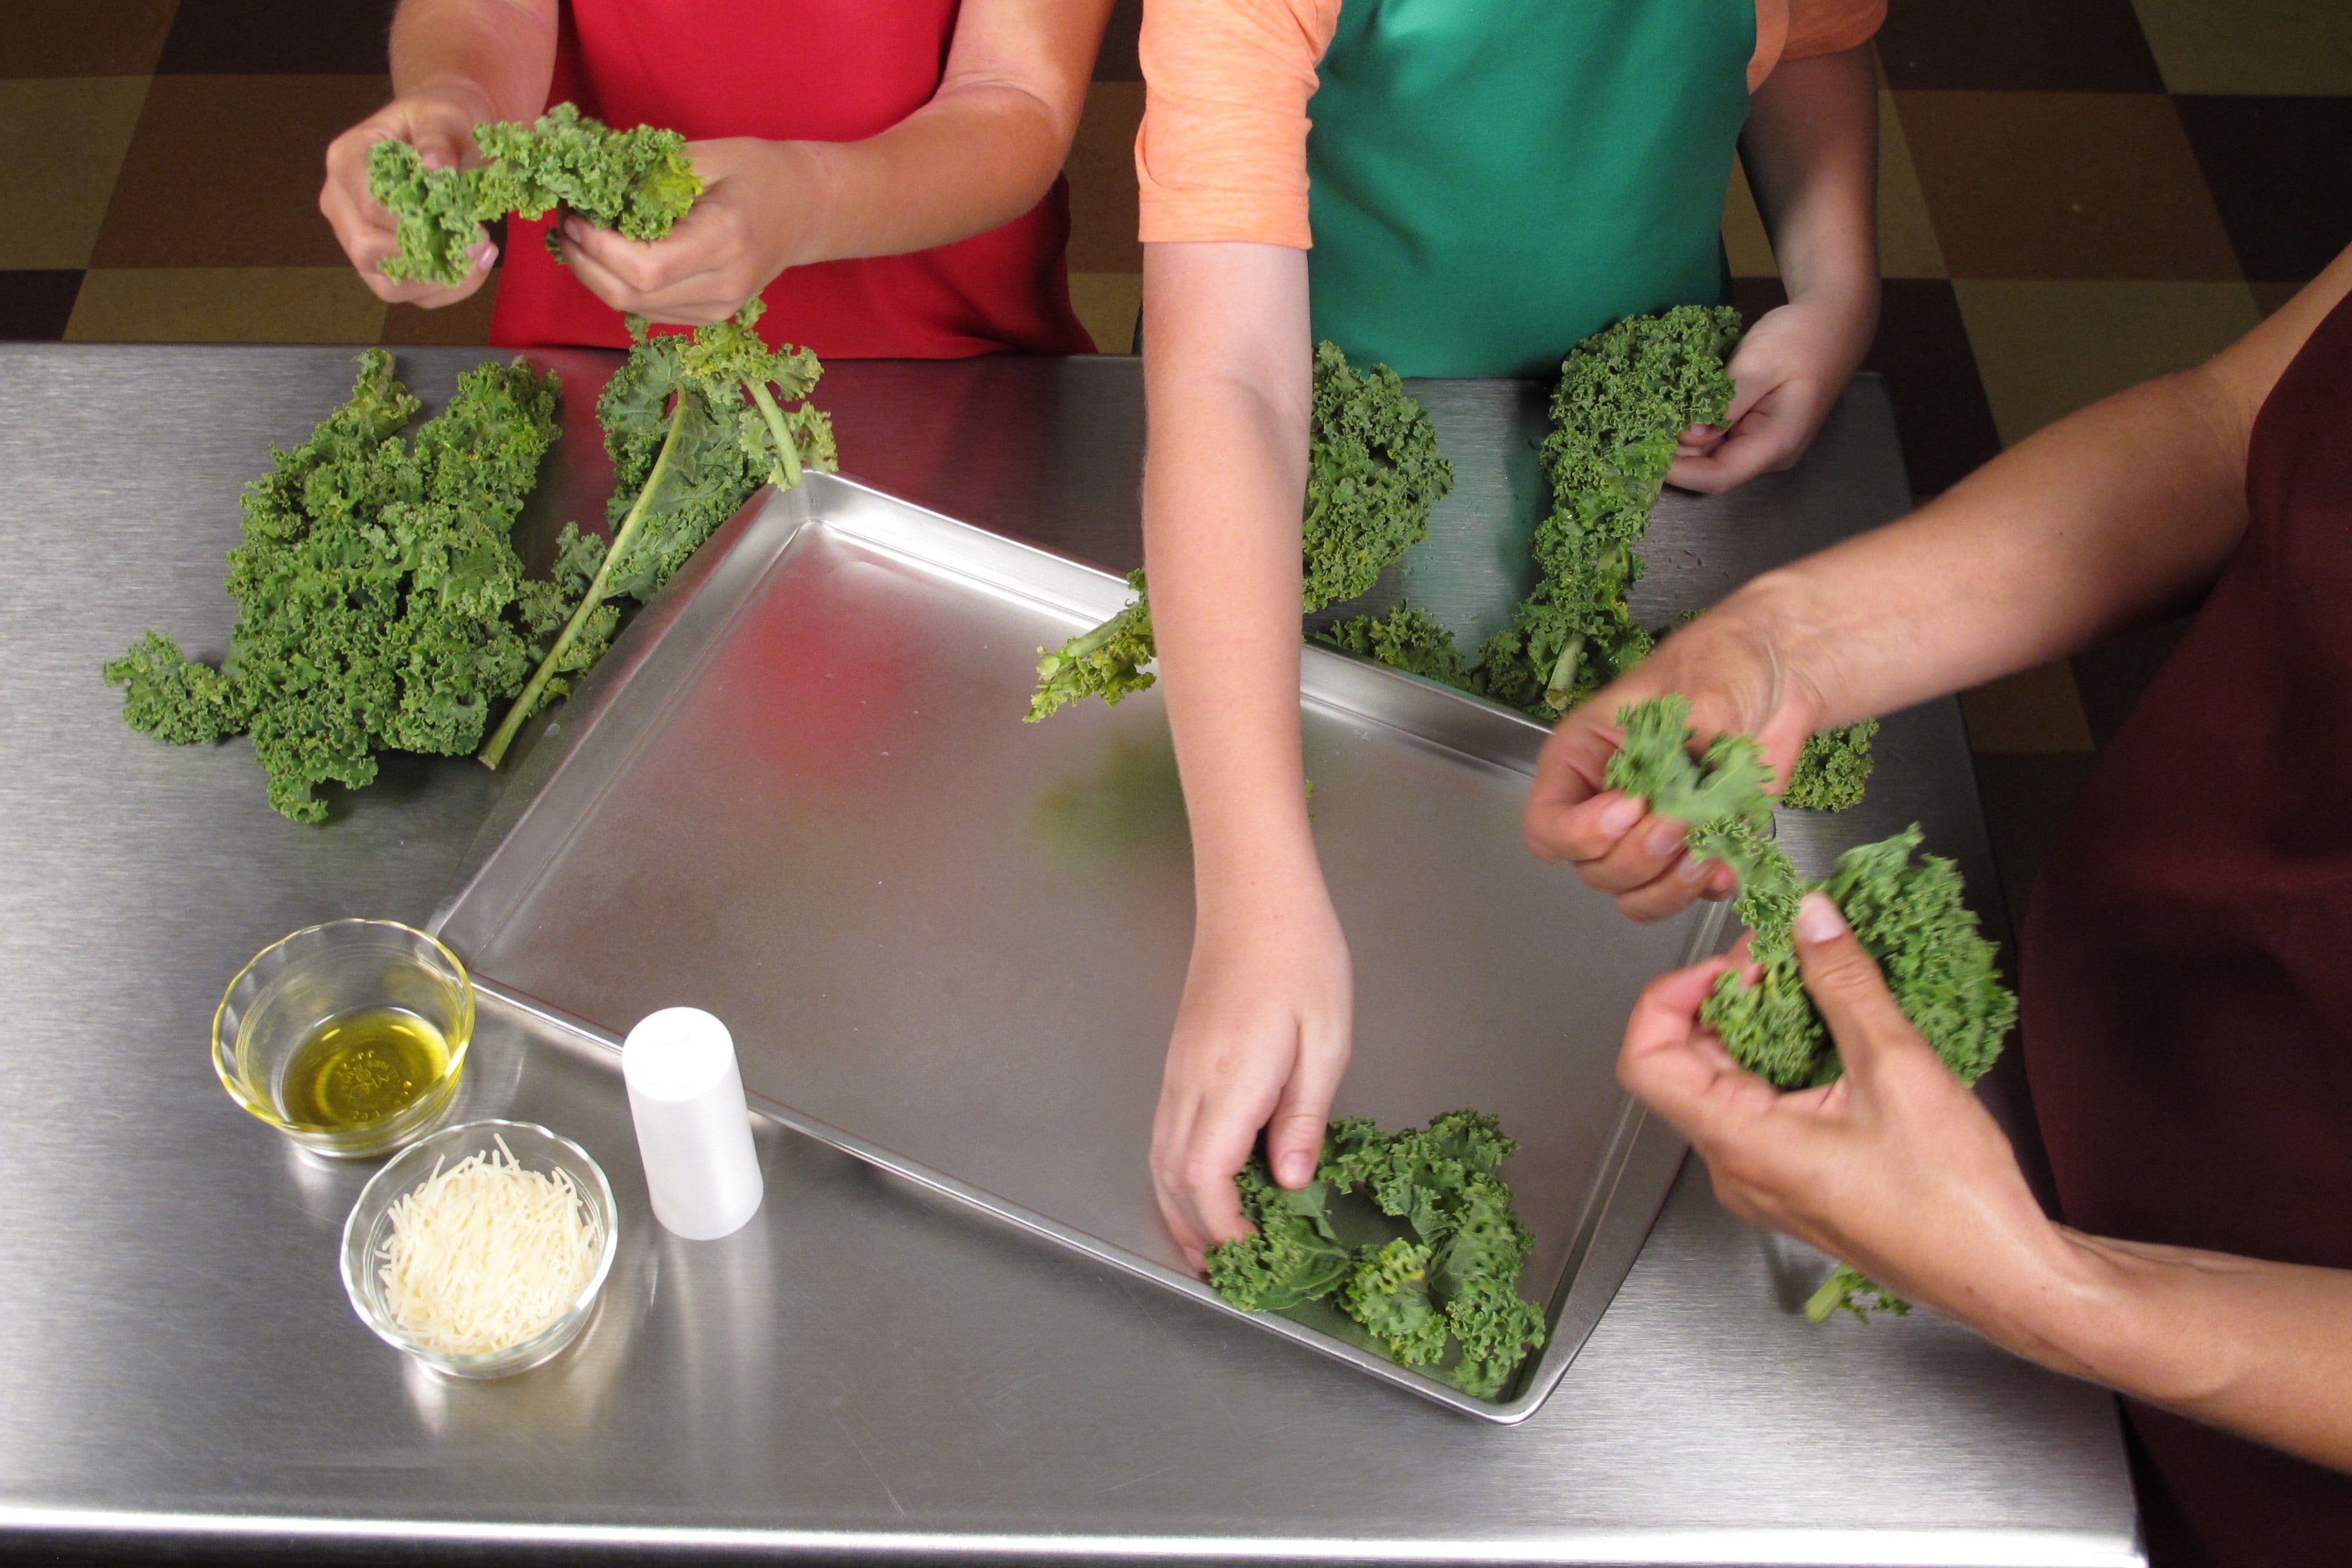 Carefully tear kale leaves from the thick stem. Tear into bite-sized pieces and place on baking sheet.